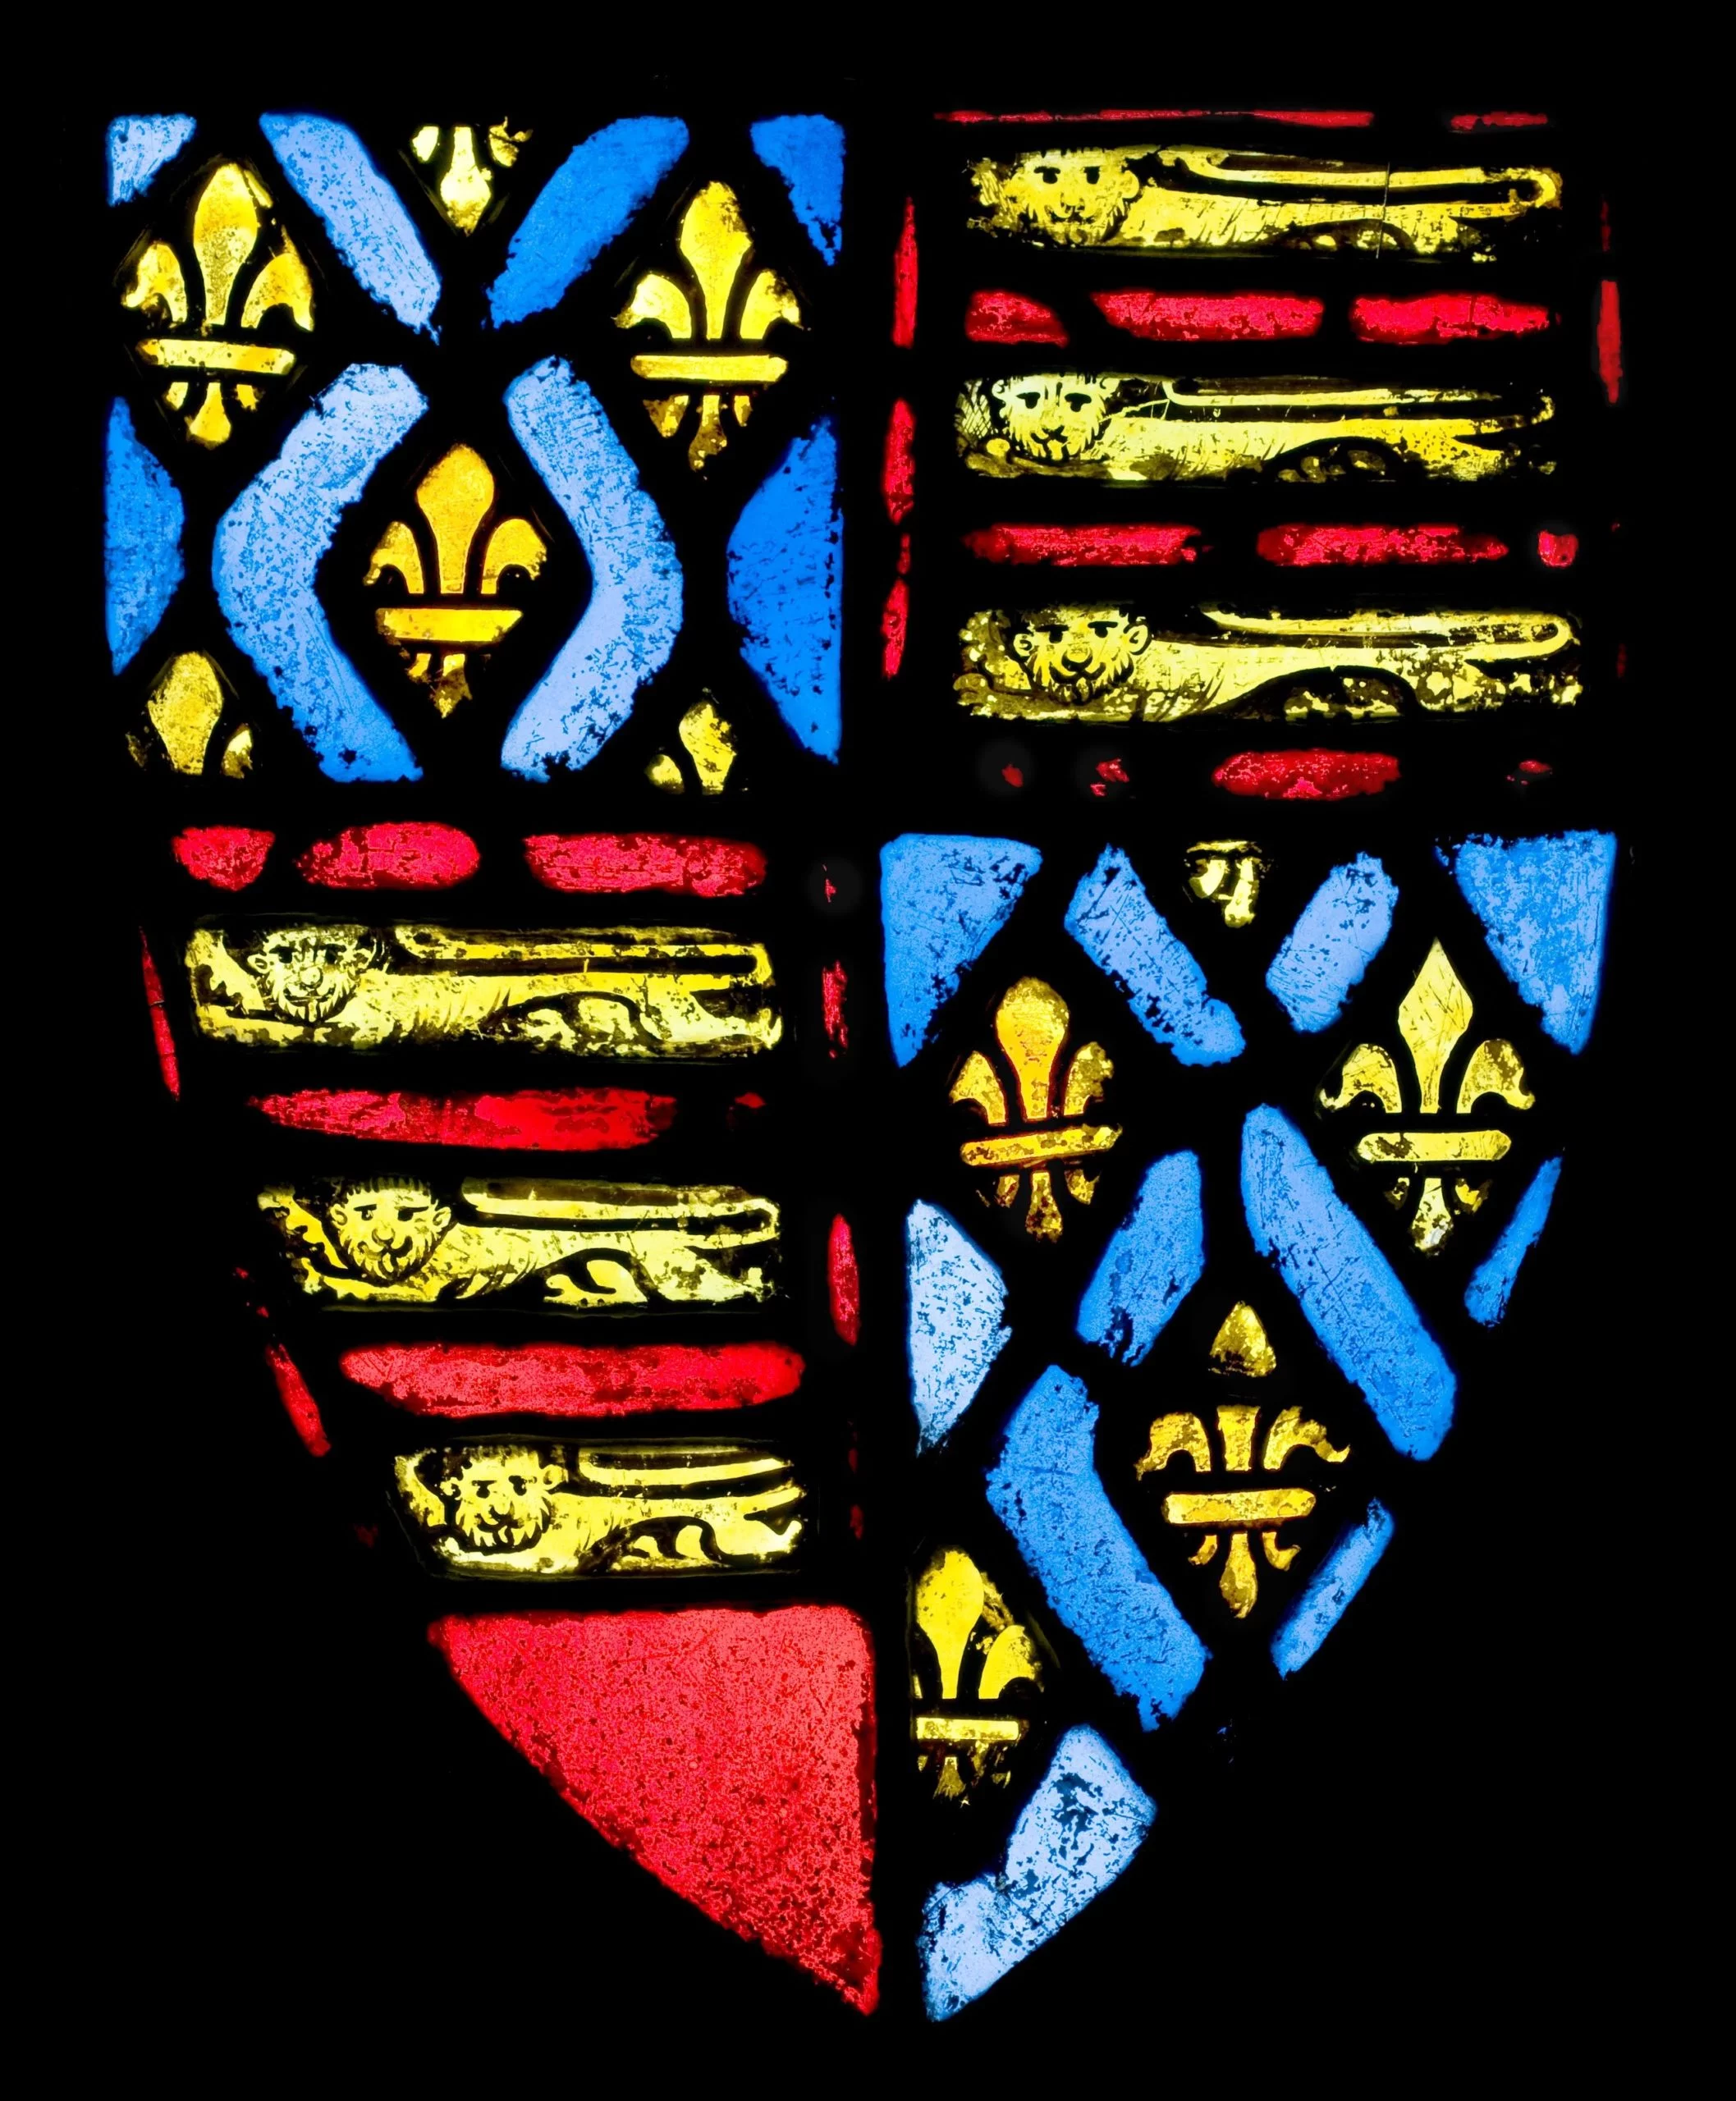 A stained glass window showing the coat of arms of Edward III